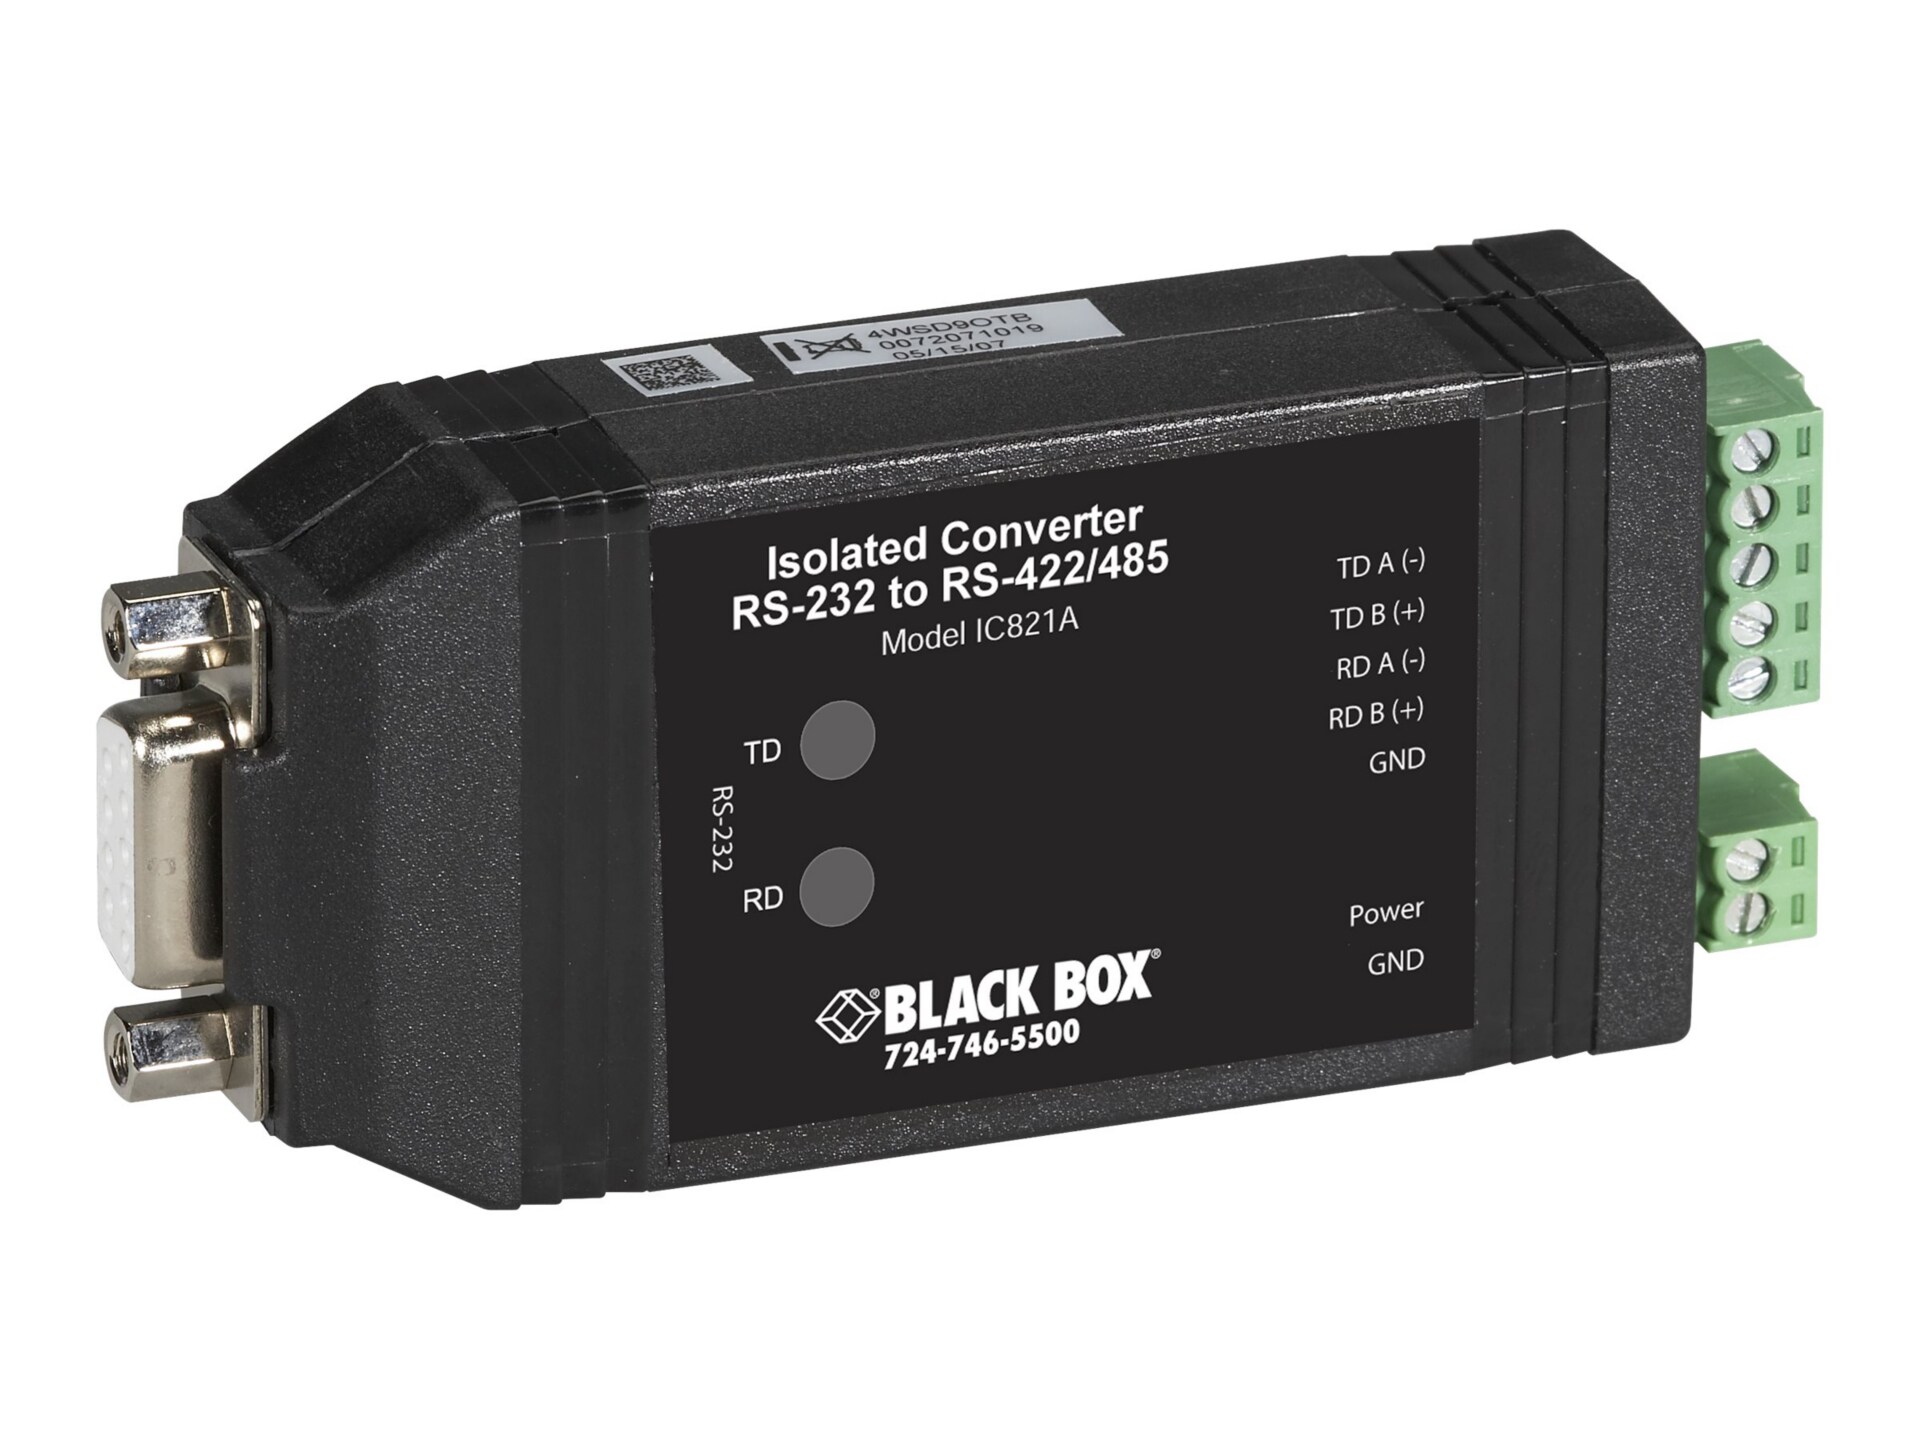 Black Box Universal RS-232<->RS-422/485 Converter with Opto-Isolation - ser